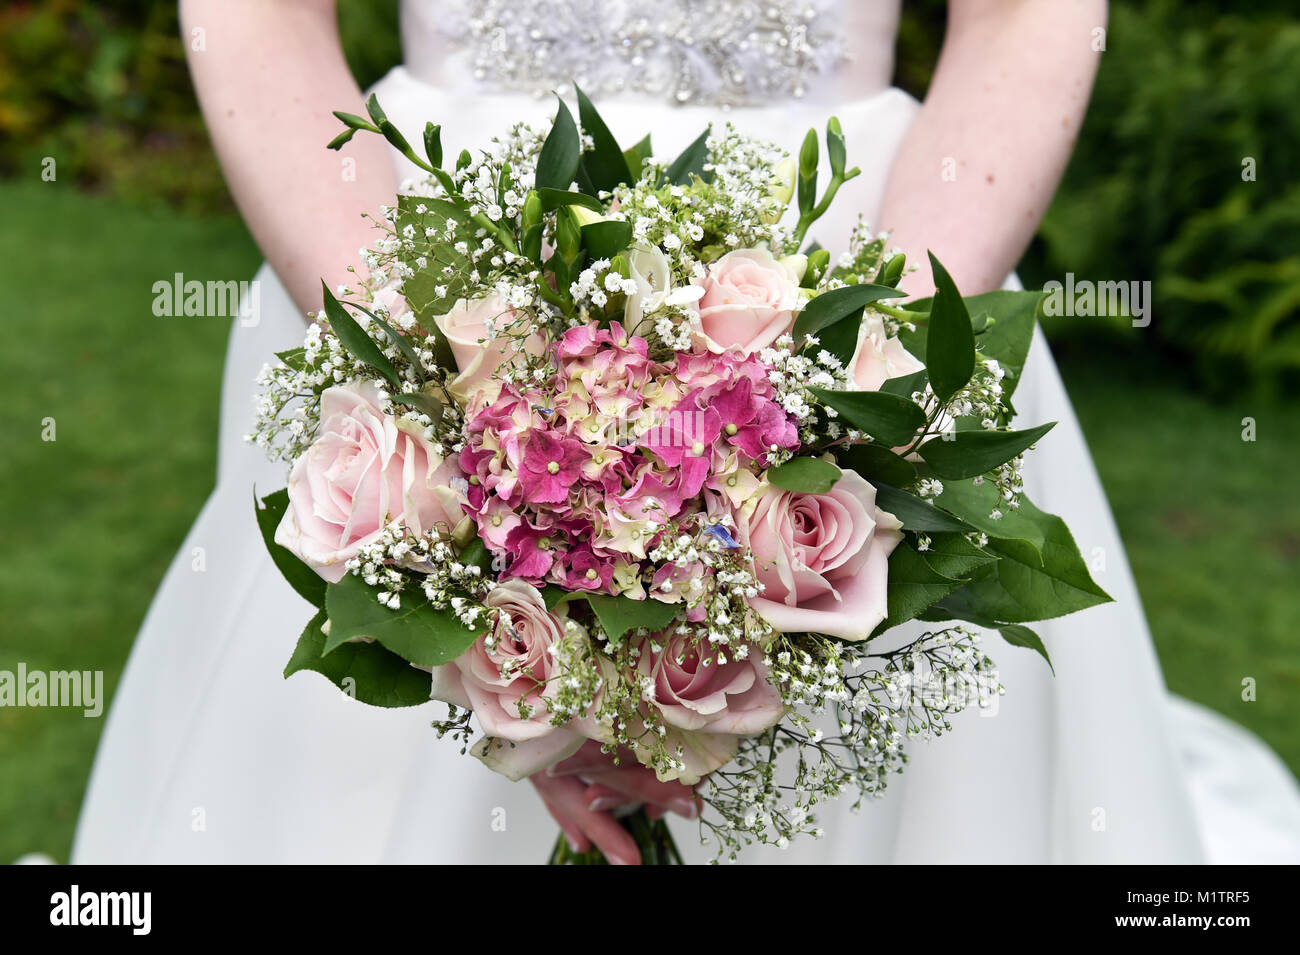 Traditional pink rose bouquet held by a bride on her wedding day Stock Photo